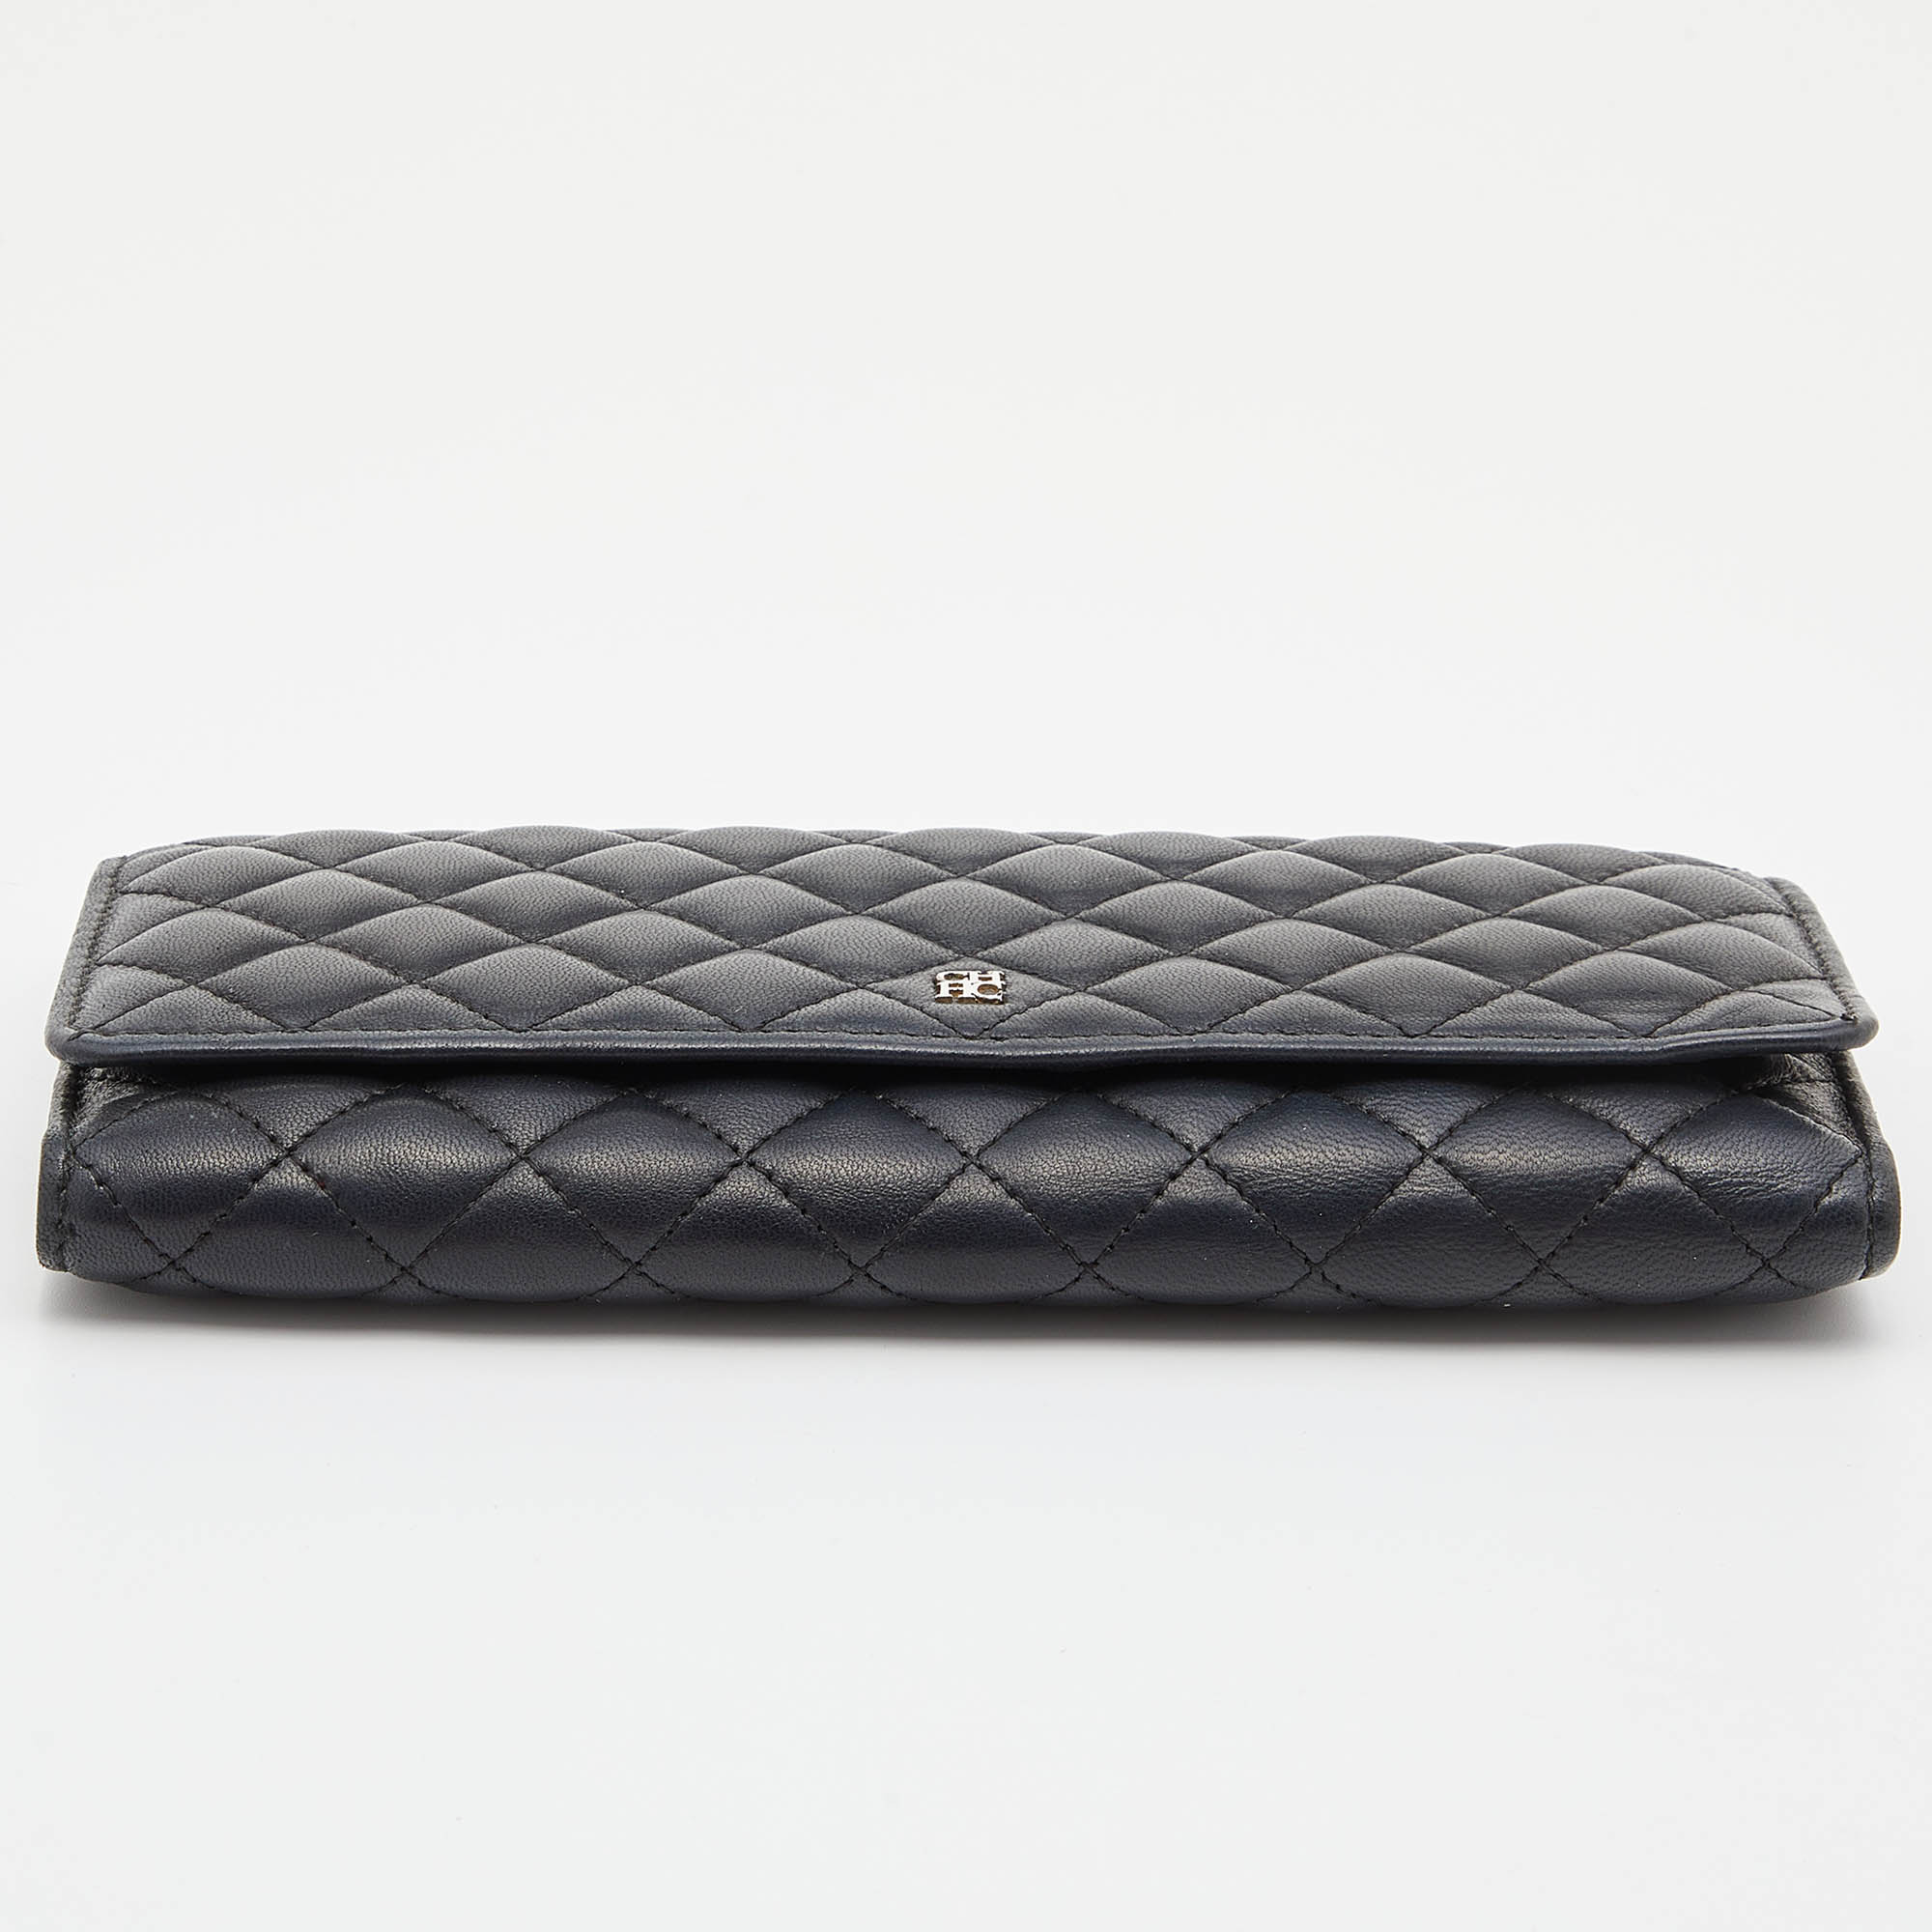 CH Carolina Herrera Black Quilted Leather Continental Wallet